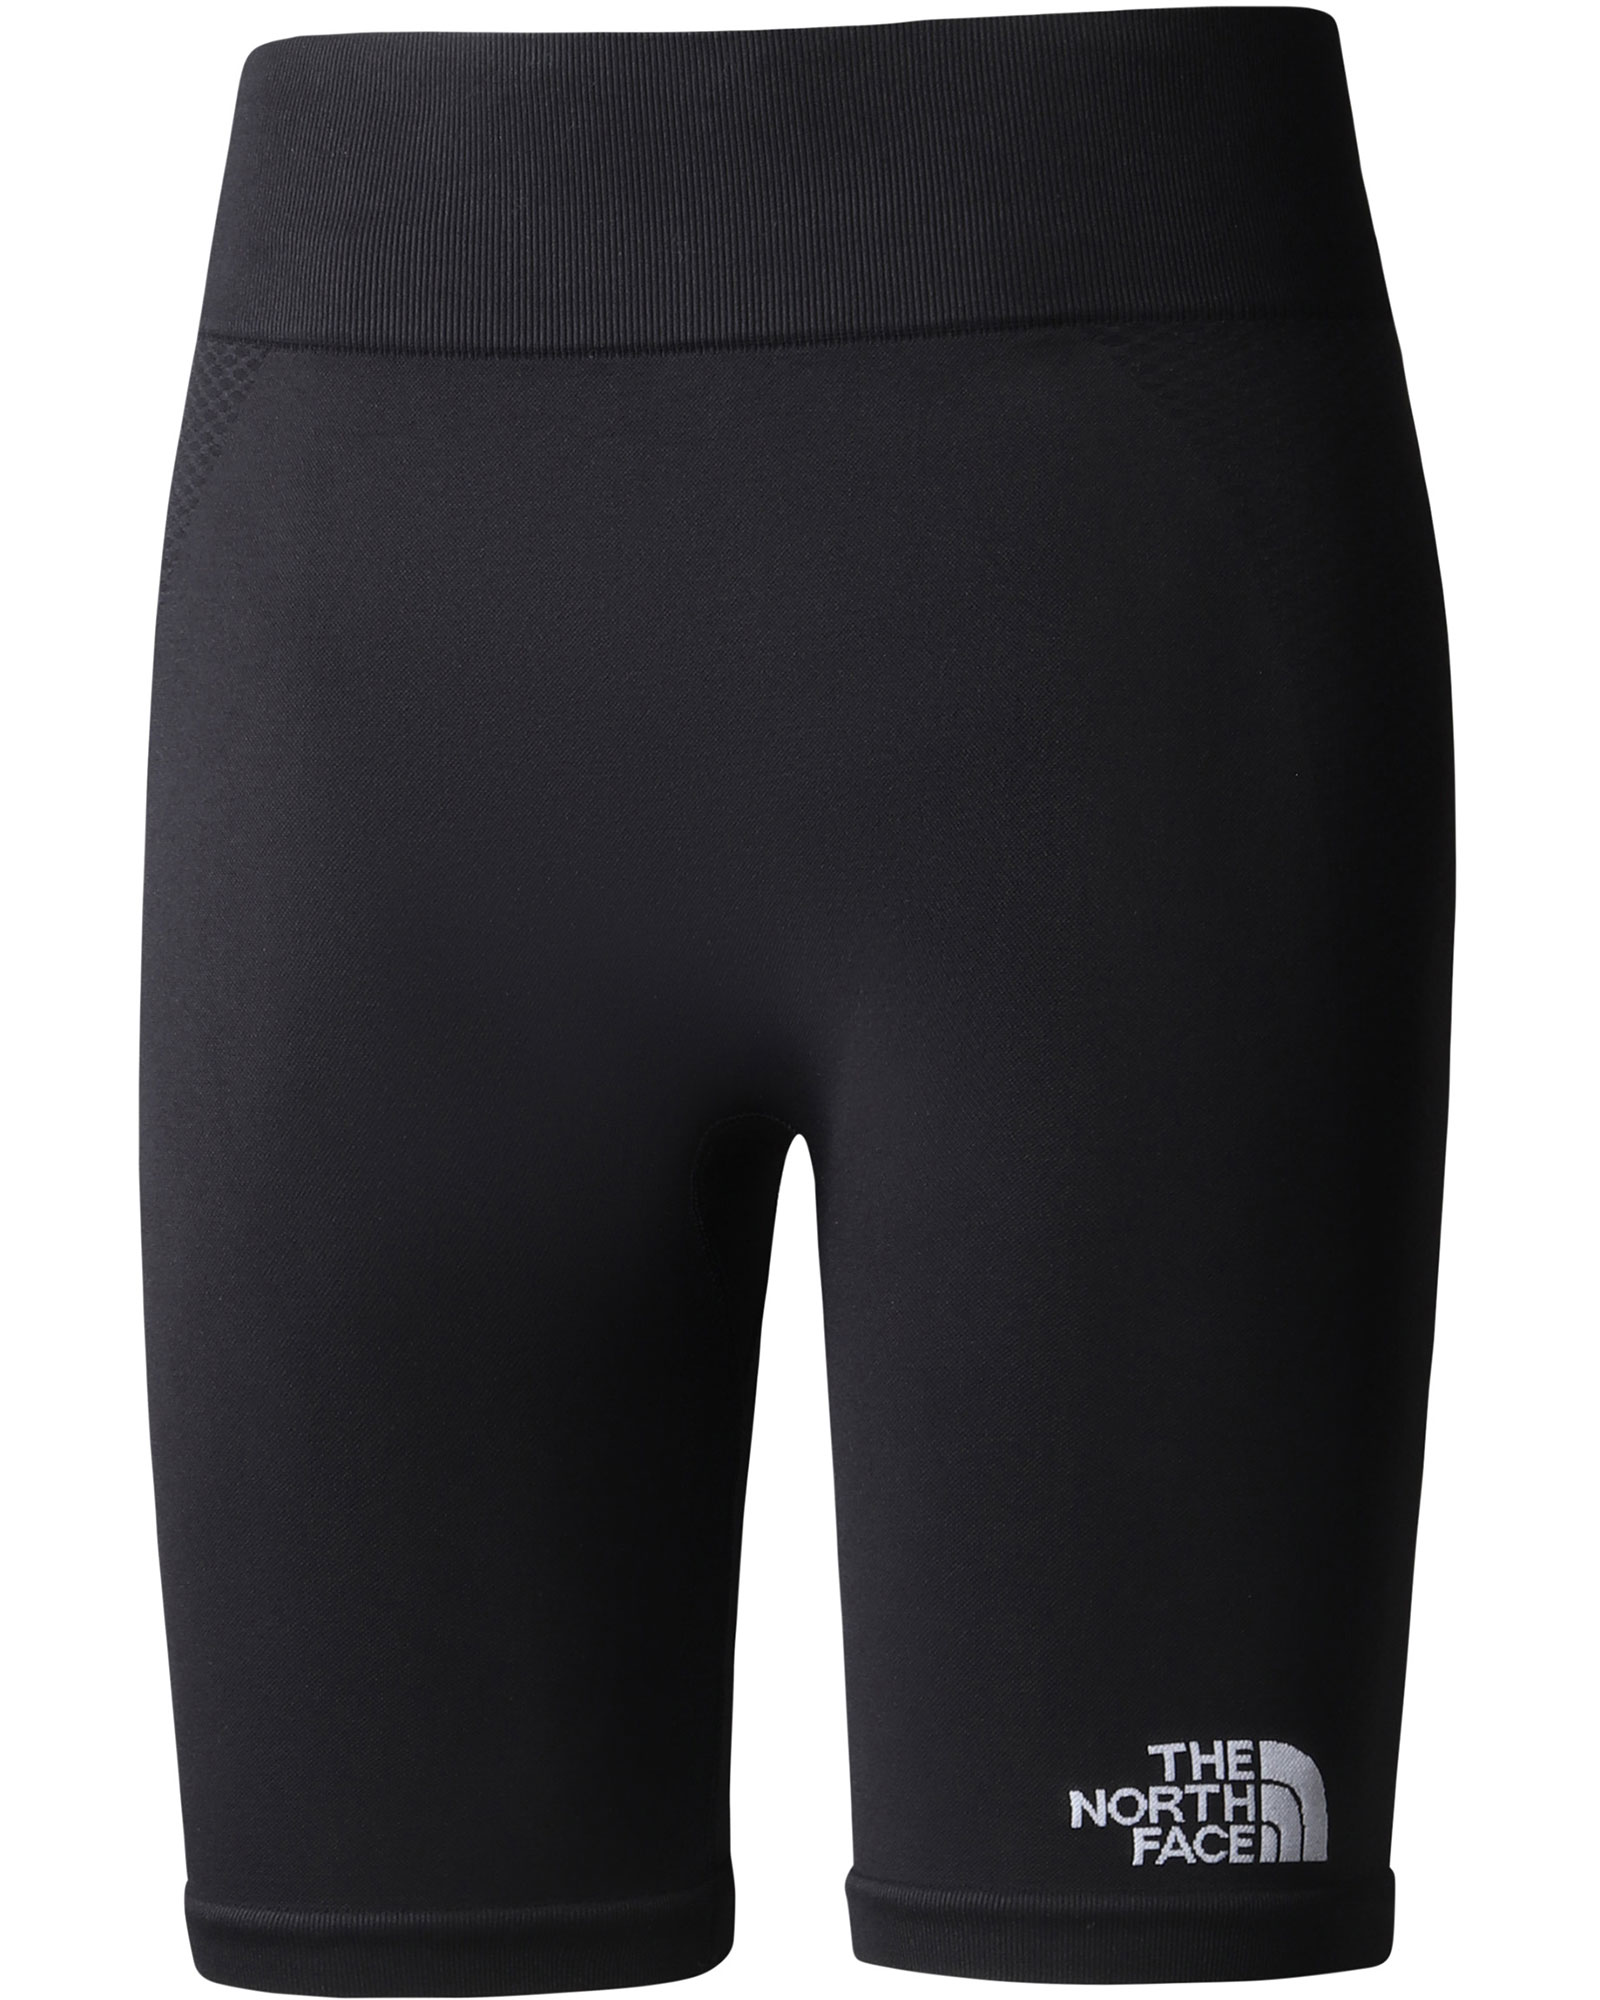 The North Face Women’s Seamless Shorts - TNF Black XS/S